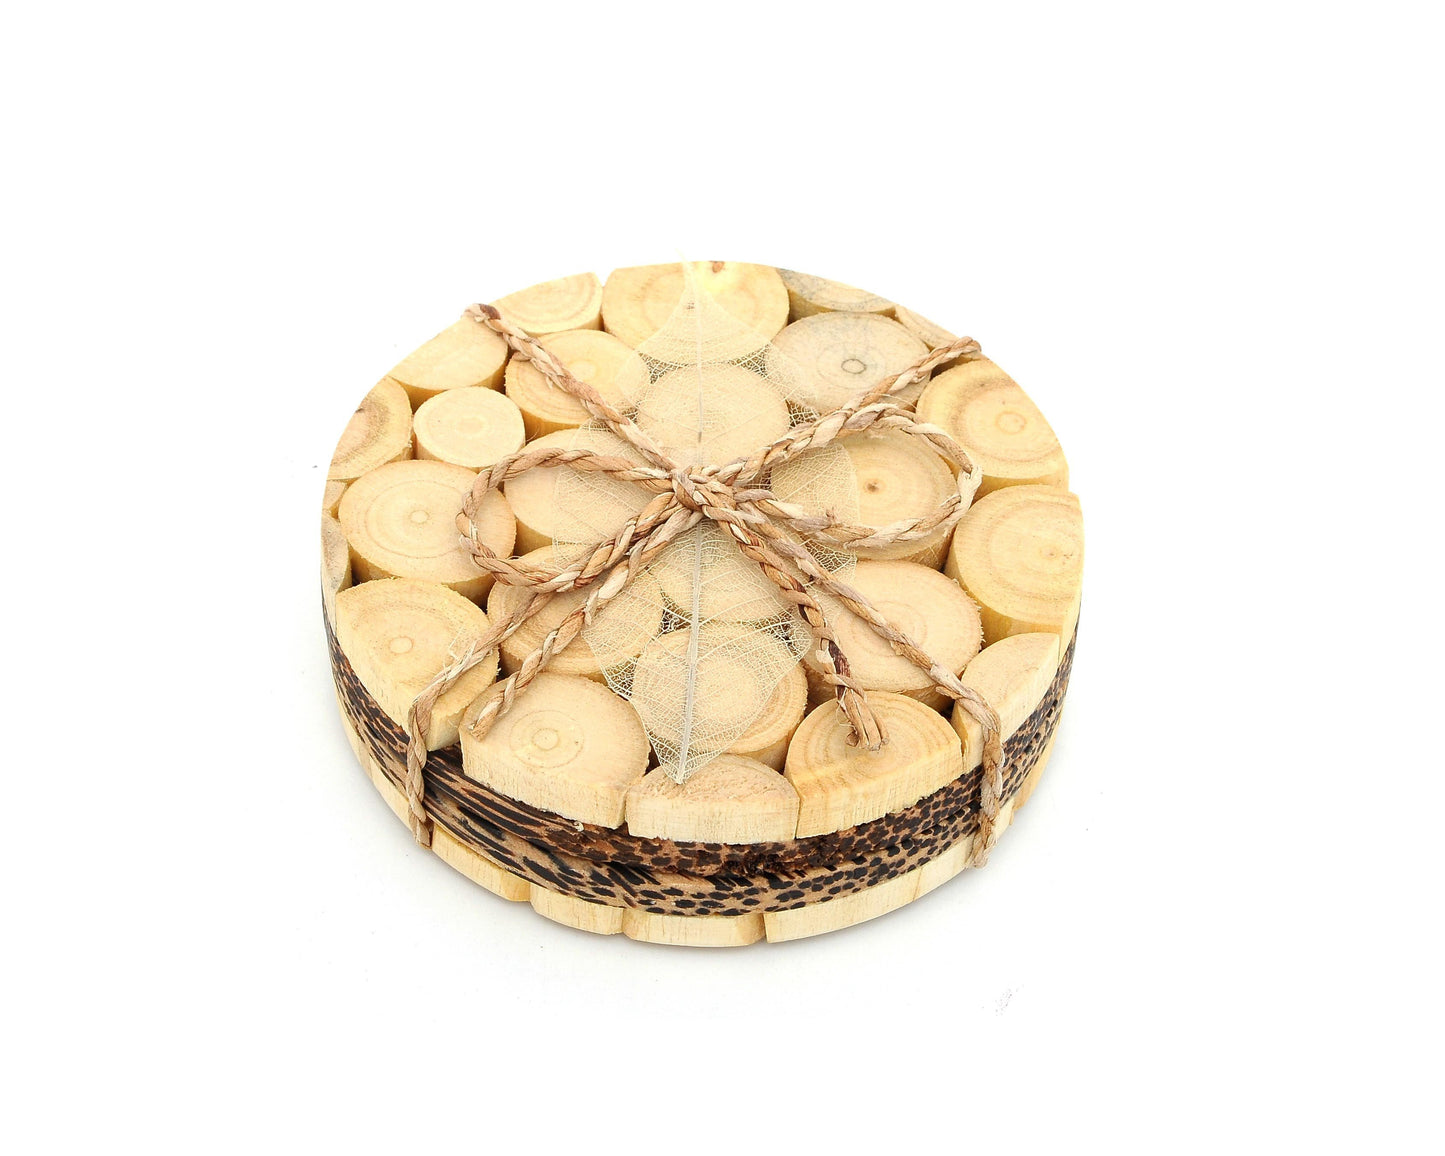 Set of 2 Myanmar Handcrafted Unique Modern Wooden Coaster With Coconut Wood